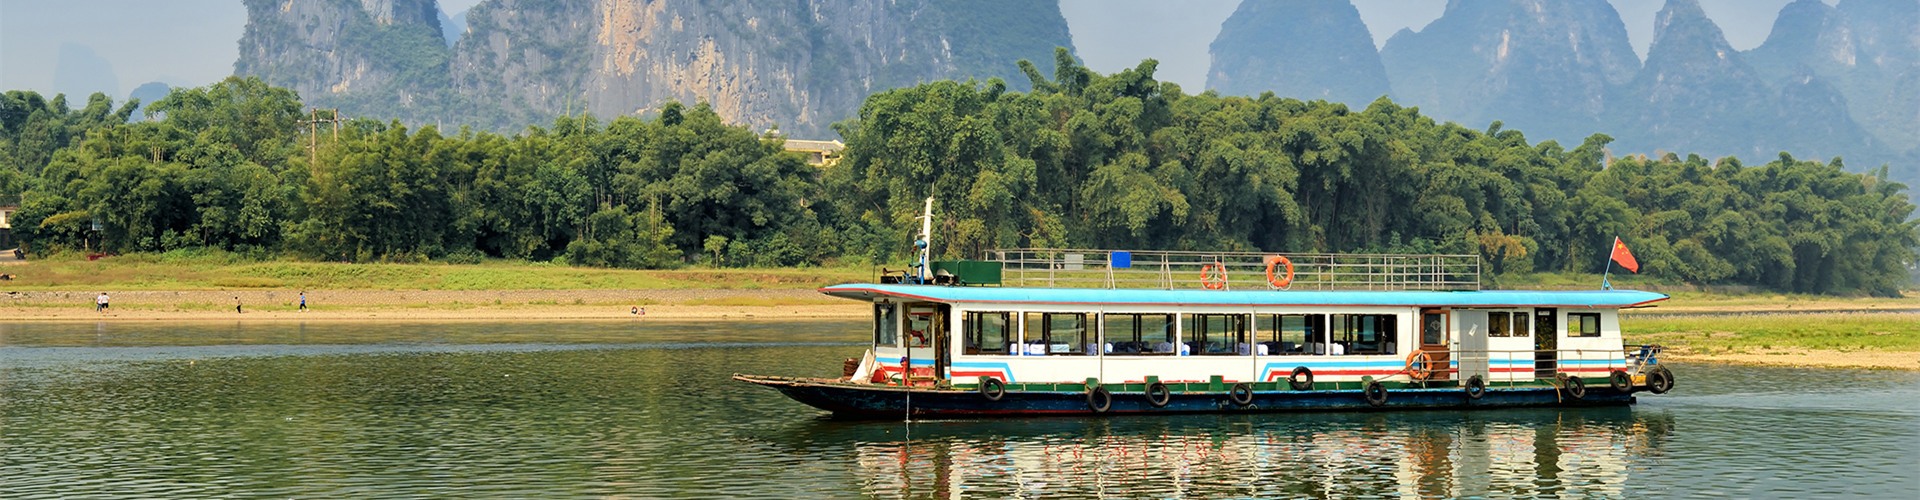 A Li River Cruise: Everything You Should Know Before Ordering Your Tickets